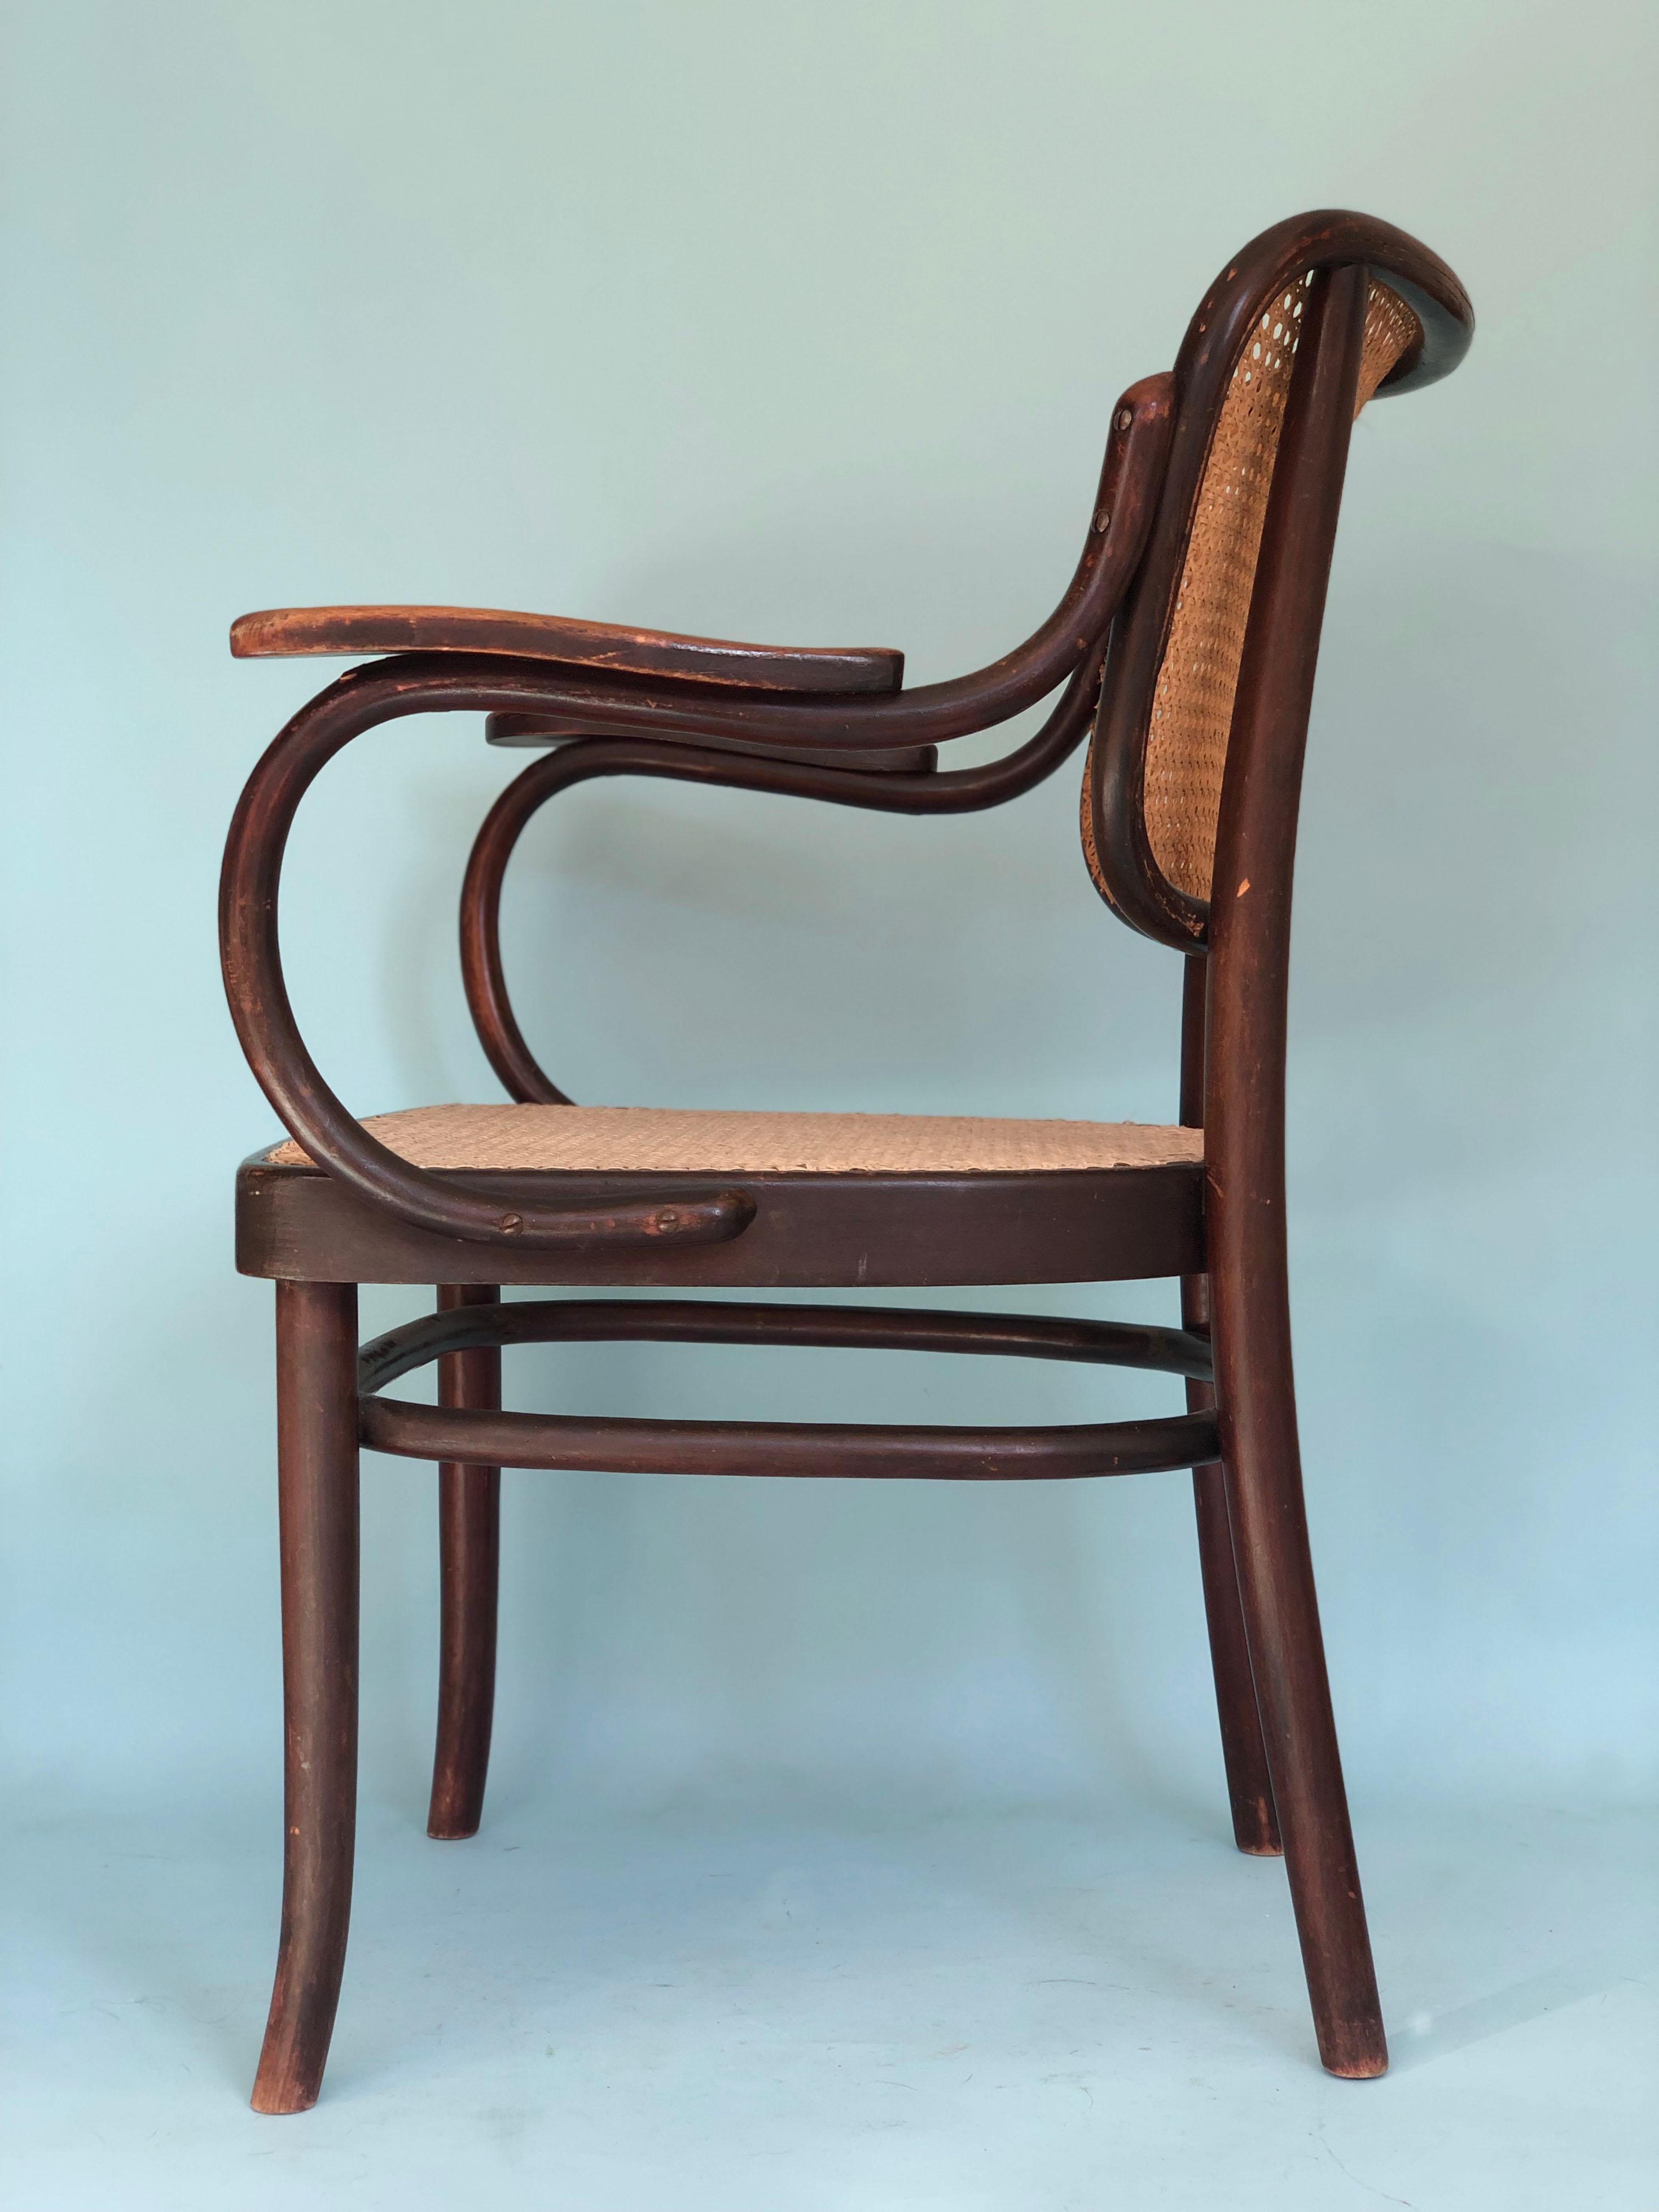 Early 20th Century Thonet Mundus Armchair Model A 283f A.G. Schneck, 1920